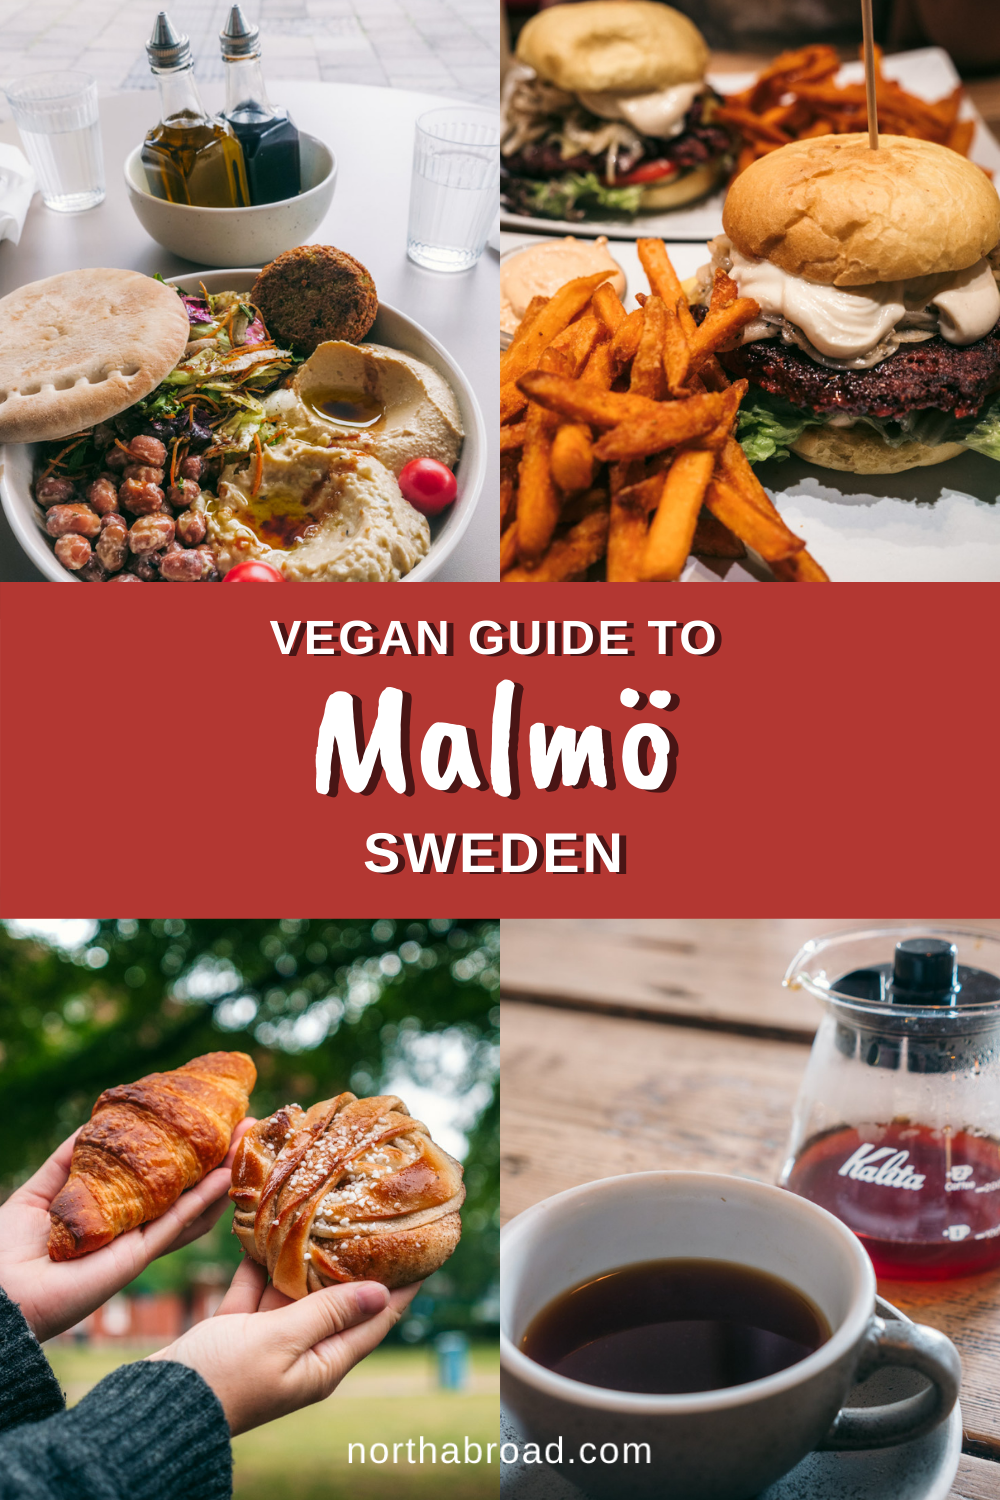 Everything you need to know about finding the most delicious vegan and vegetarian places in Malmö, Sweden